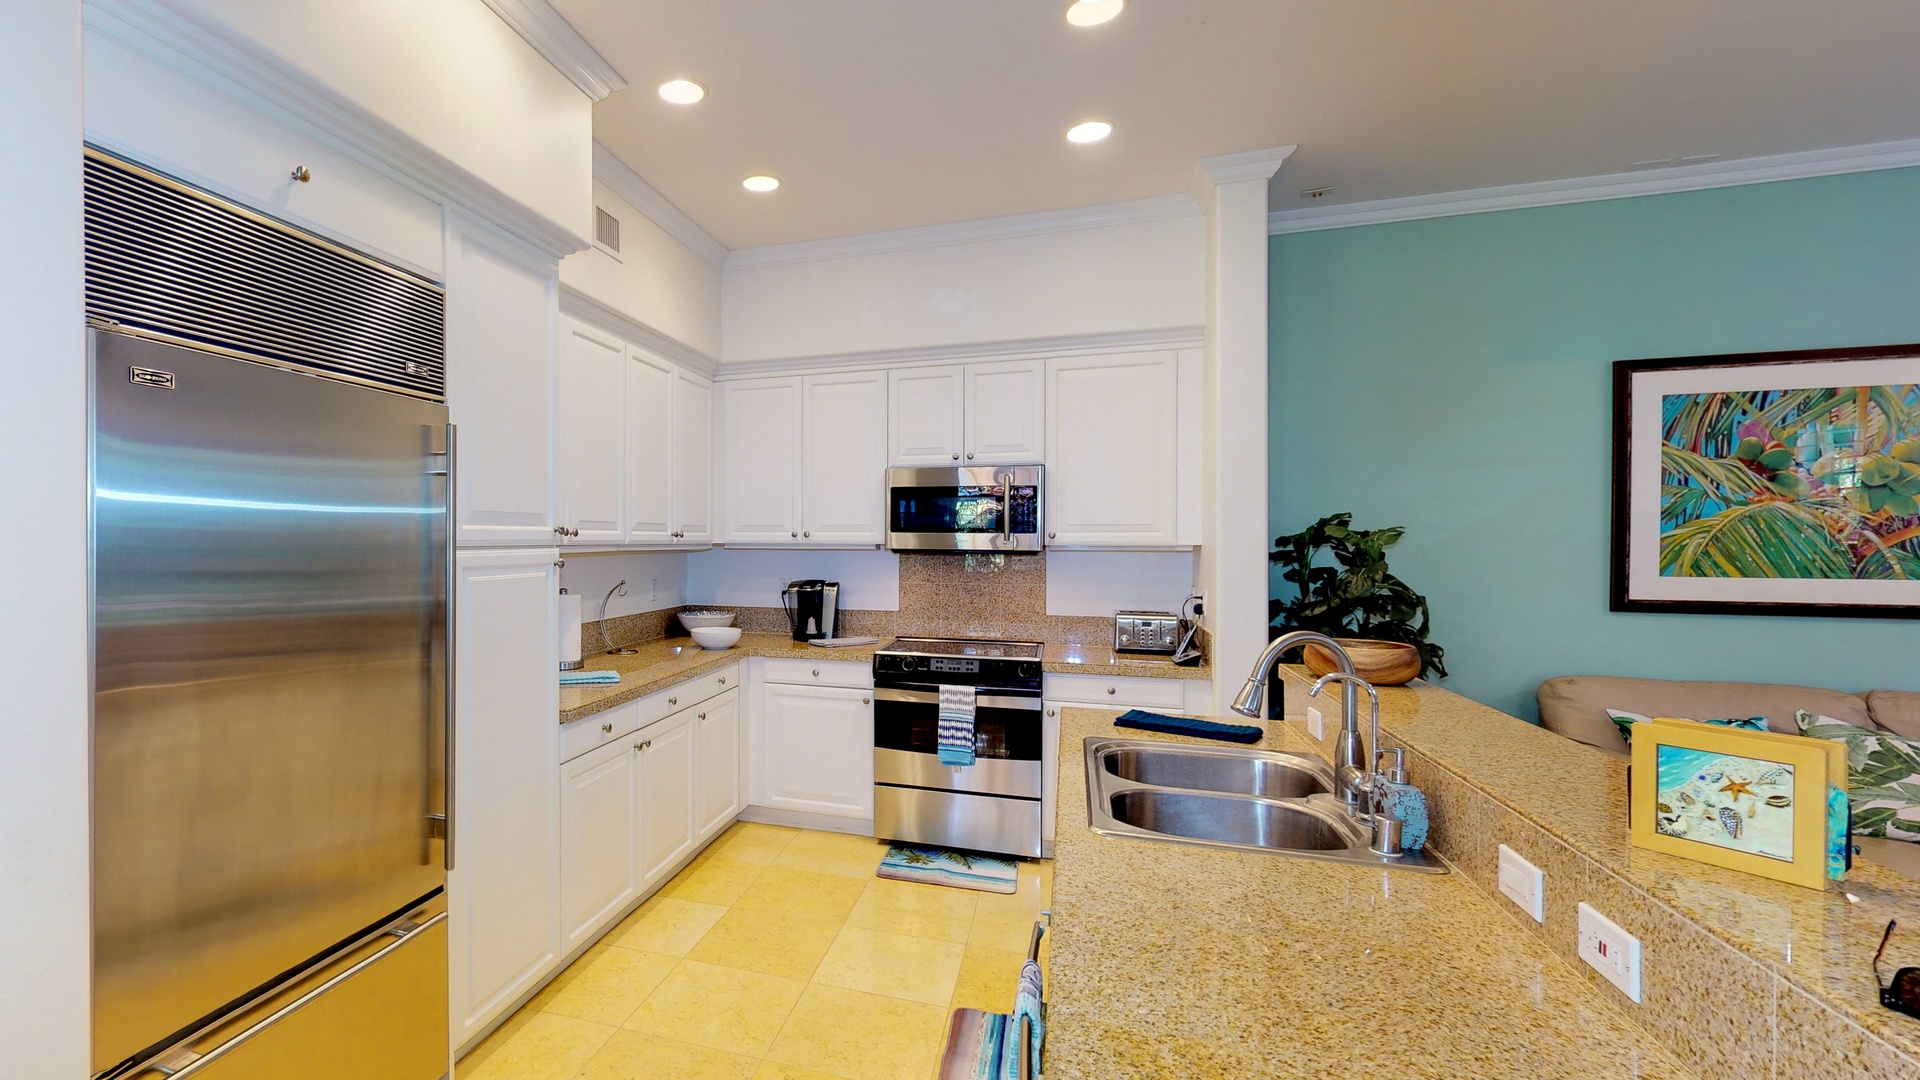 Kapolei Vacation Rentals, Coconut Plantation 1200-4 - The bright kitchen has plenty of counter space for all meal prep.